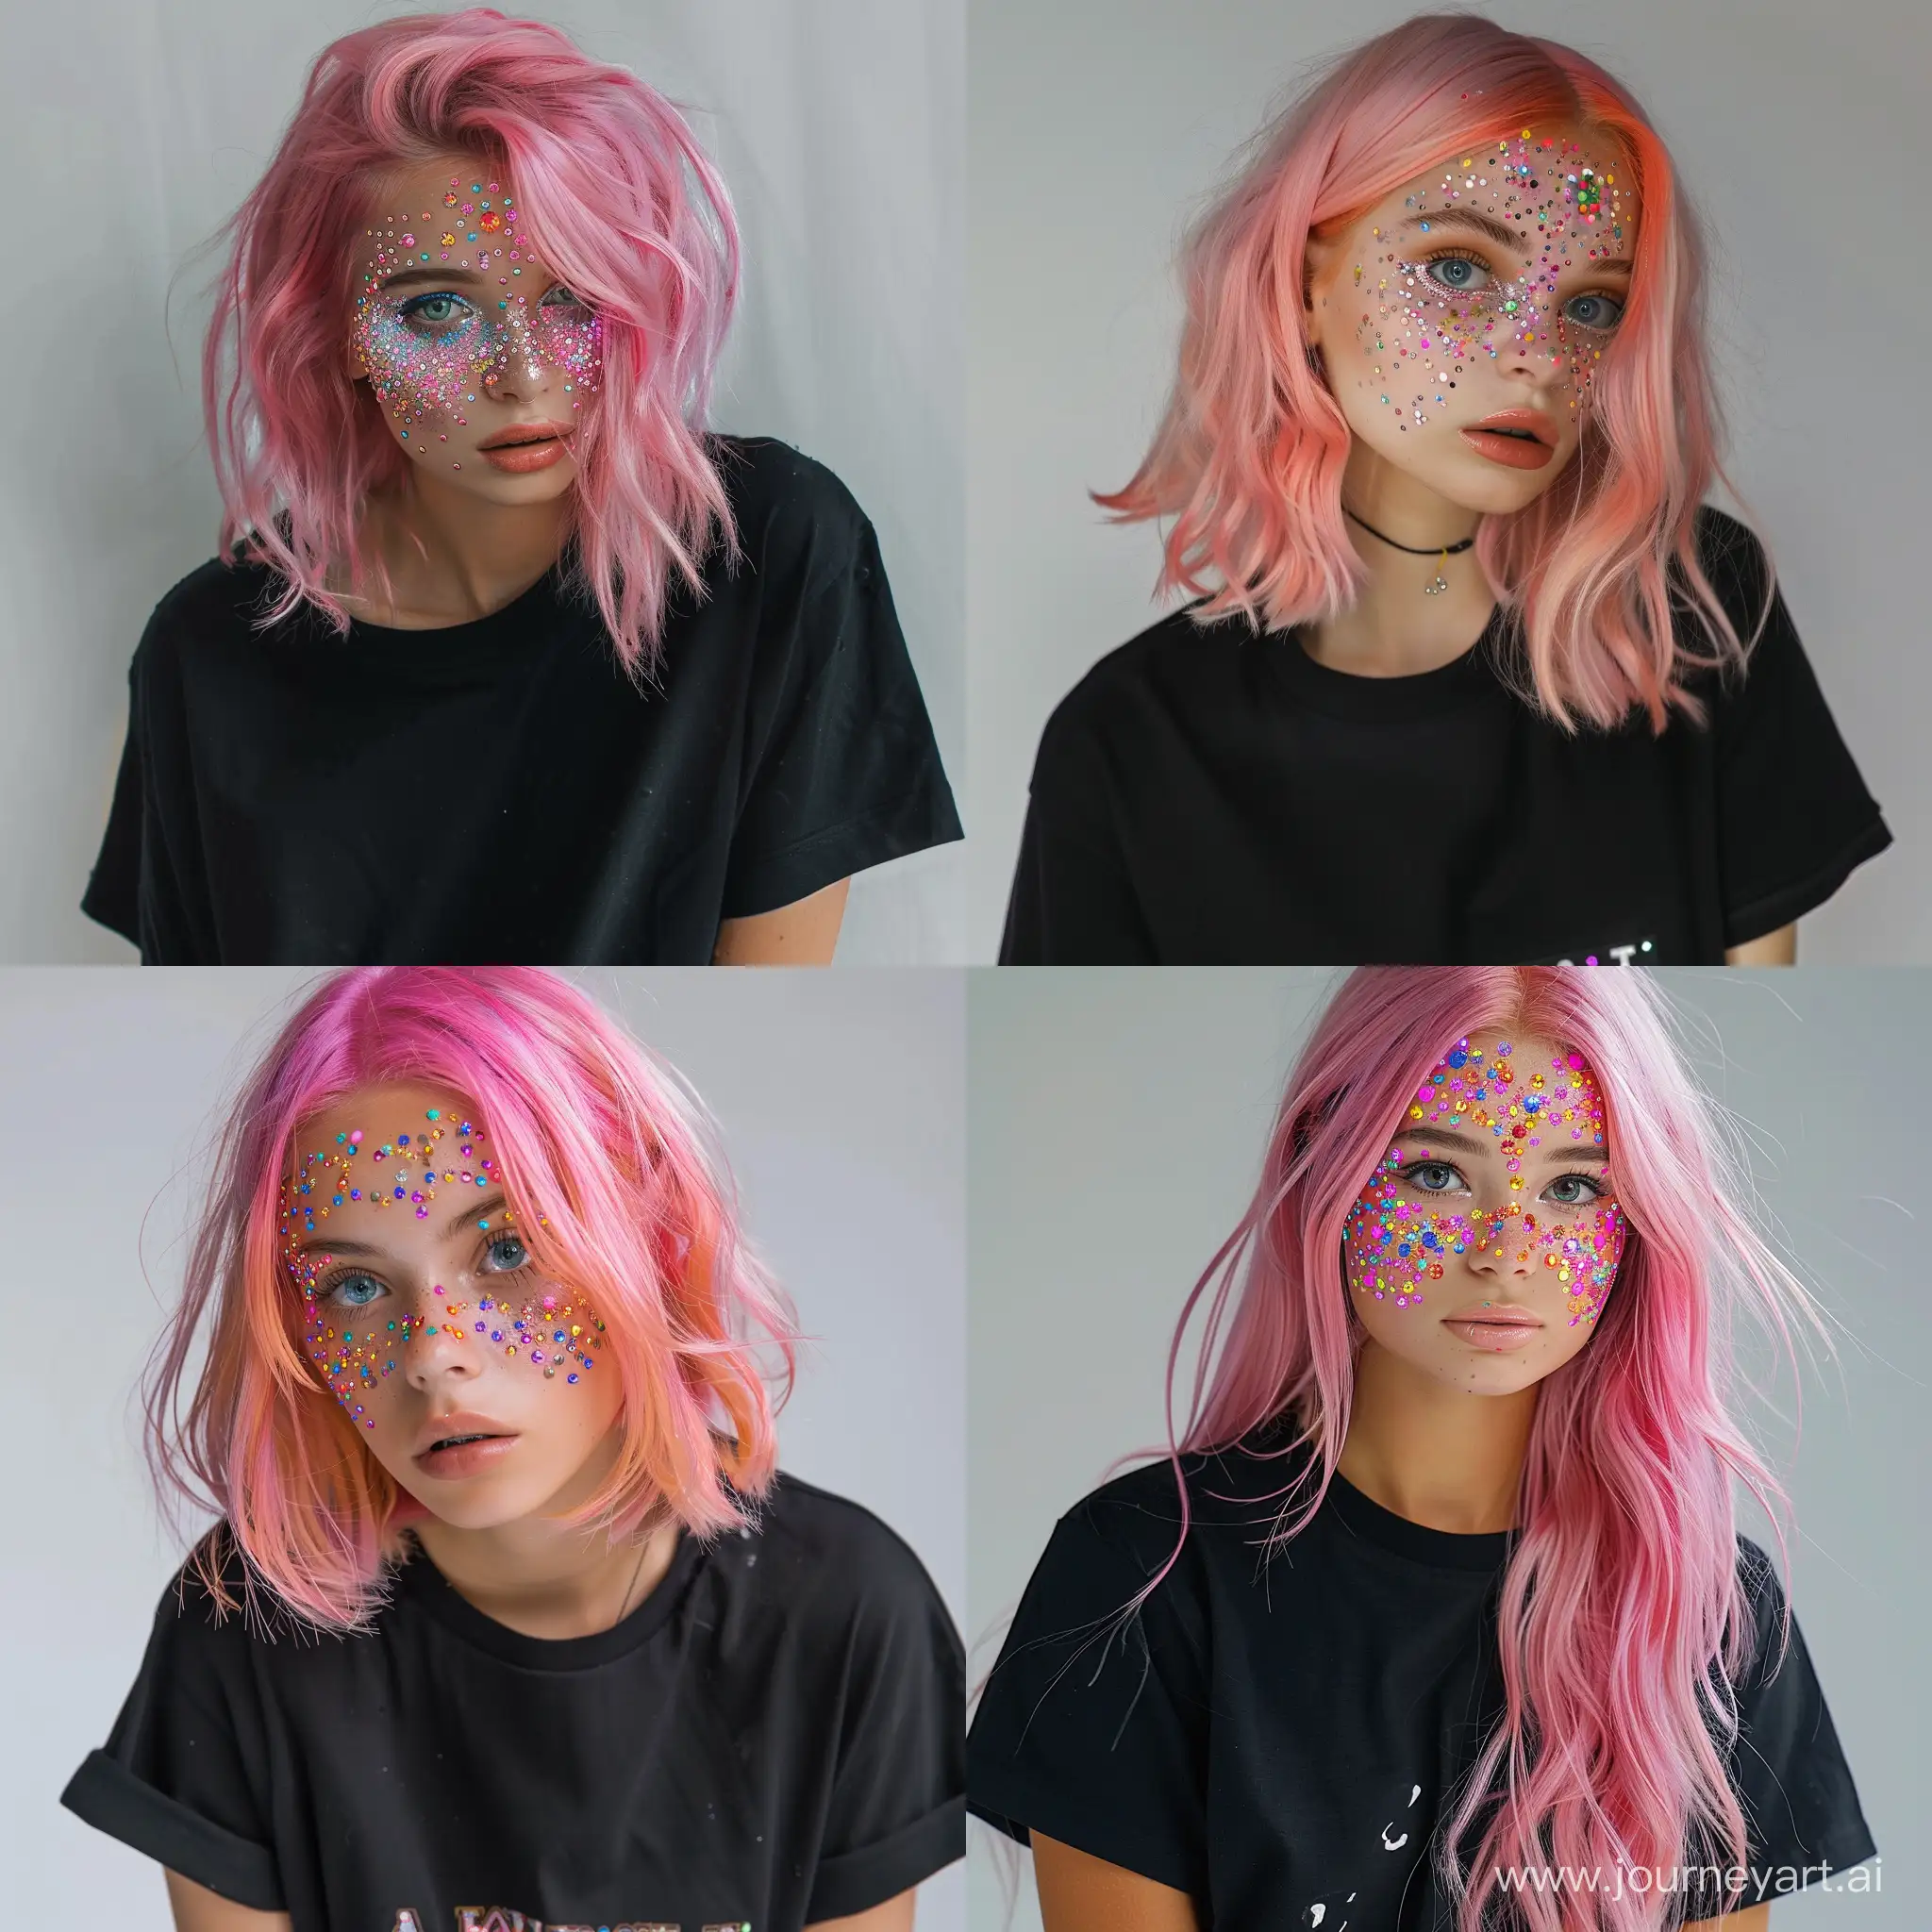 Colorful-Girl-with-Pink-Hair-and-Rhinestones-in-Black-TShirt